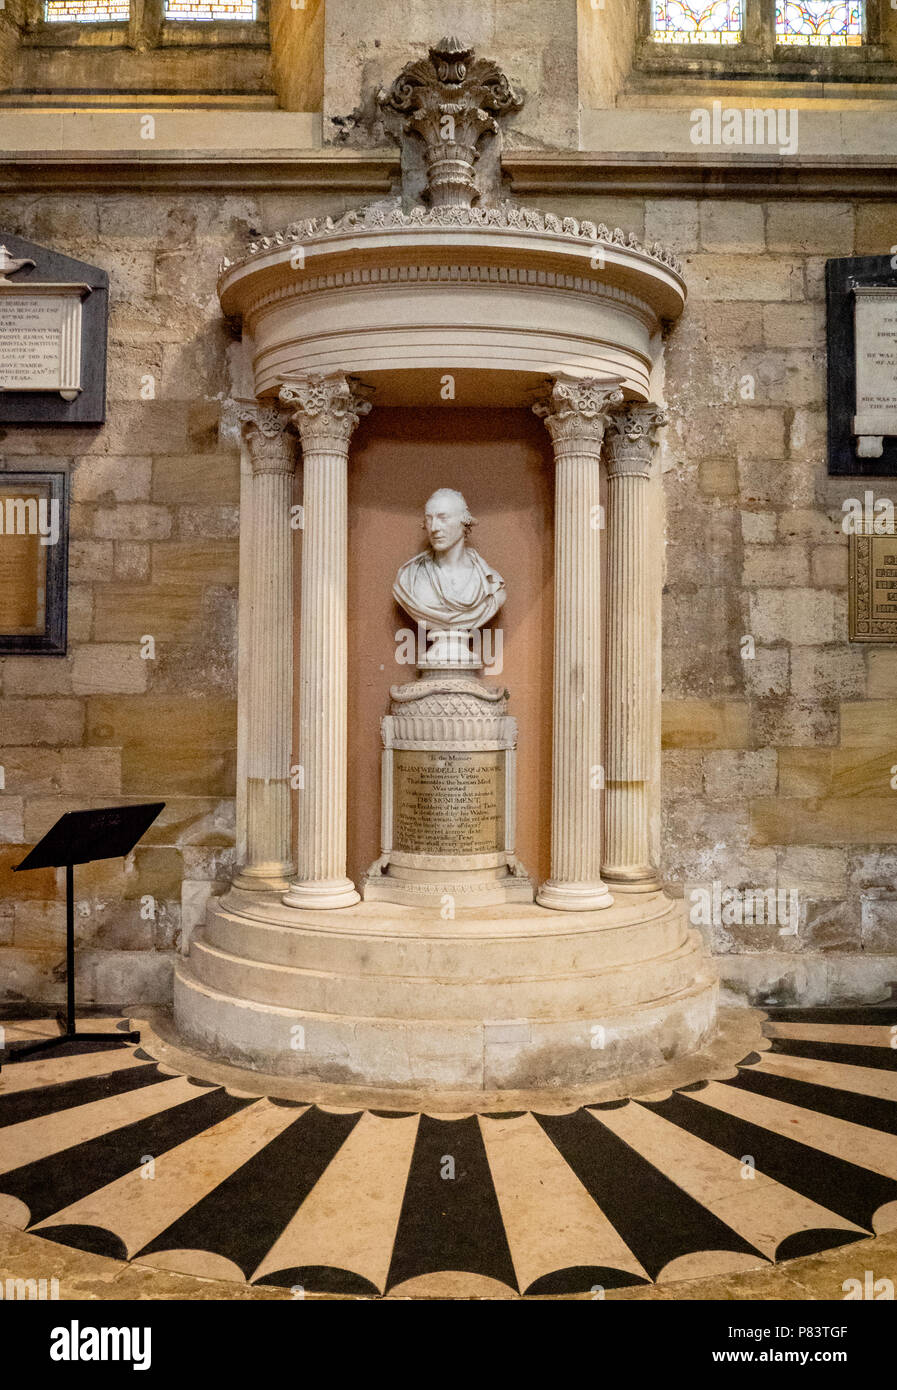 Lavish memorial to William Weddell of Newby Hall Yorkshire land owner politician and antiquities collector in Ripon cathedral UK Stock Photo